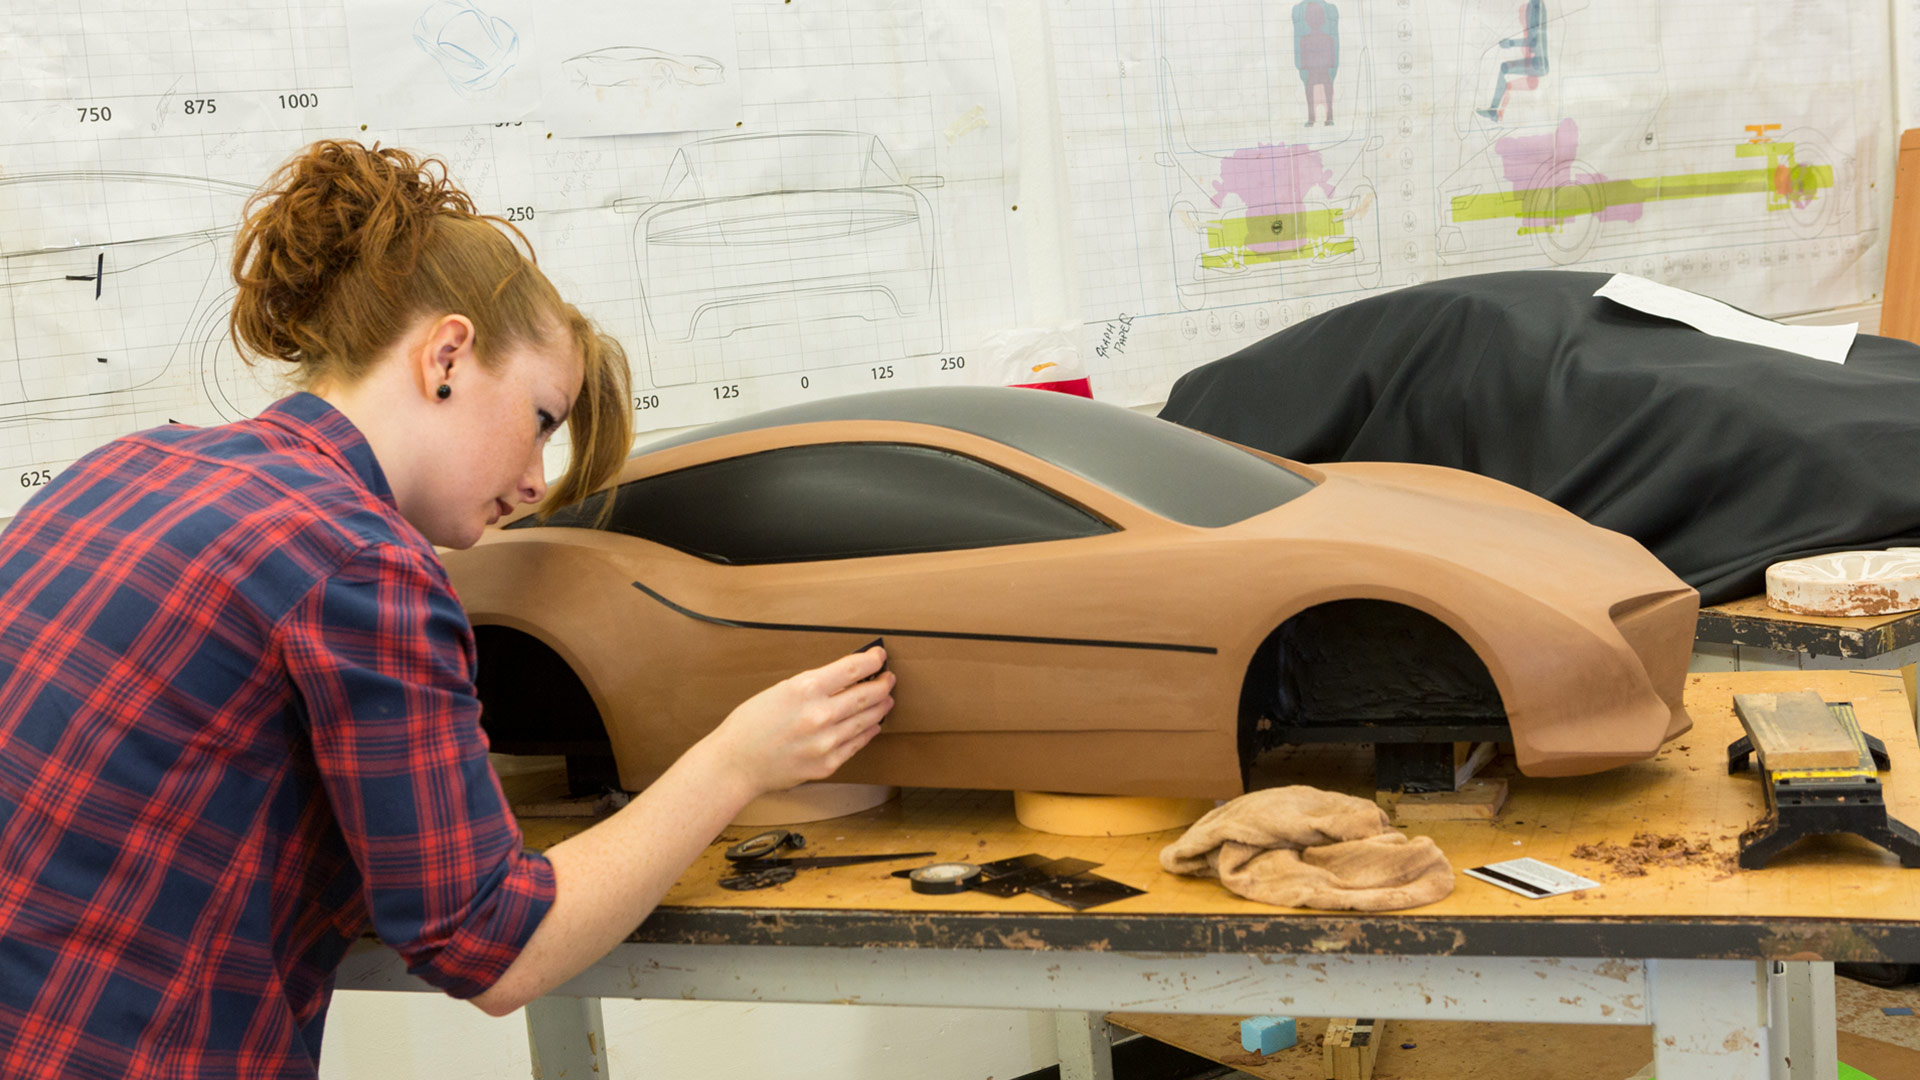 A student working on creating a model of a vehicle